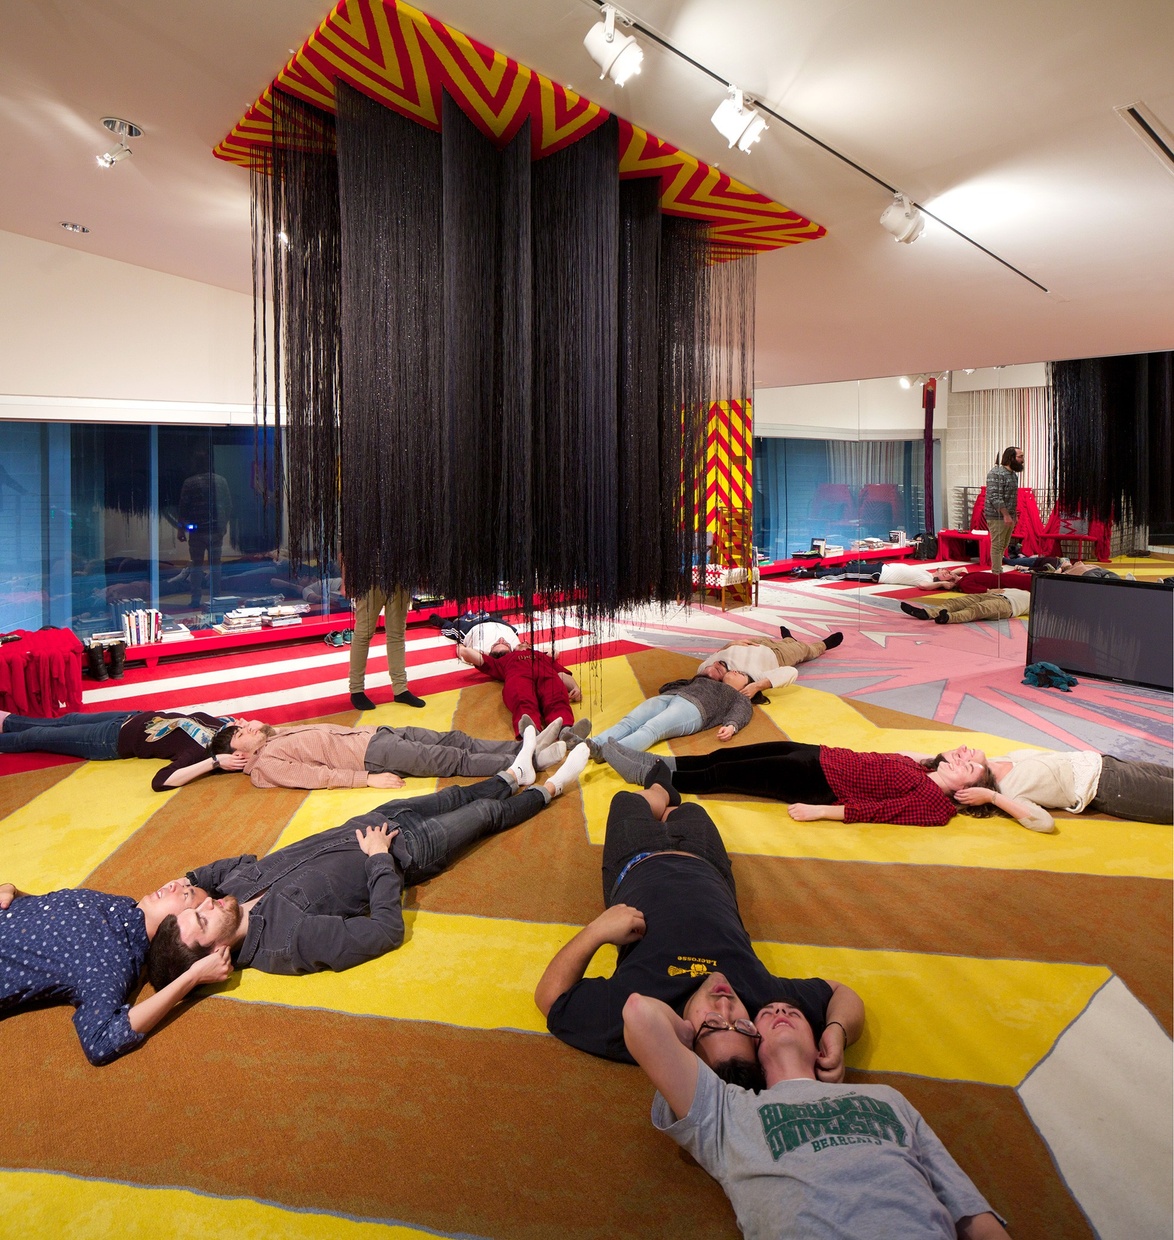 A group of young people lie in a starburst formation on a yellow, abstractly-patterned carpet underneath a red, yellow, and black abstract hanging sculpture.